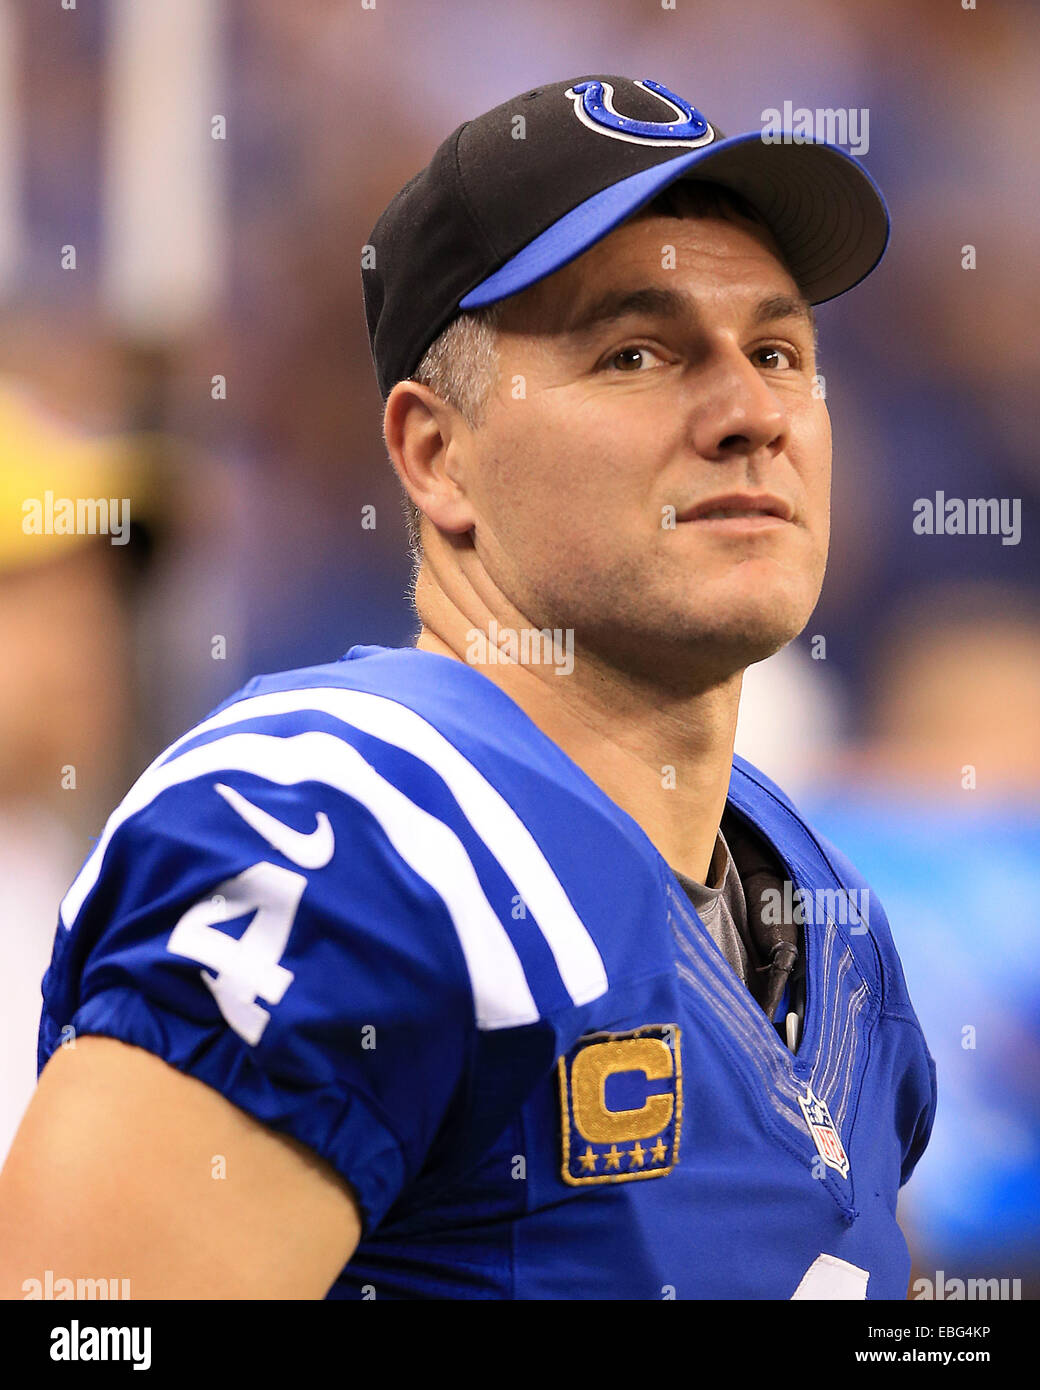 Indianapolis, IN, USA. 30th Nov, 2014. Indianapolis Colts kicker Adam Vinatieri (4) as seen during the second half of the NFL game between the Washington Redskins and the Indianapolis Colts at Lucas Oil Stadium in Indianapolis, Indiana. The Colts defeated the Redskins 49-27. Credit: 2014 Billy Hurst/CSM/Alamy Live News Stock Photo